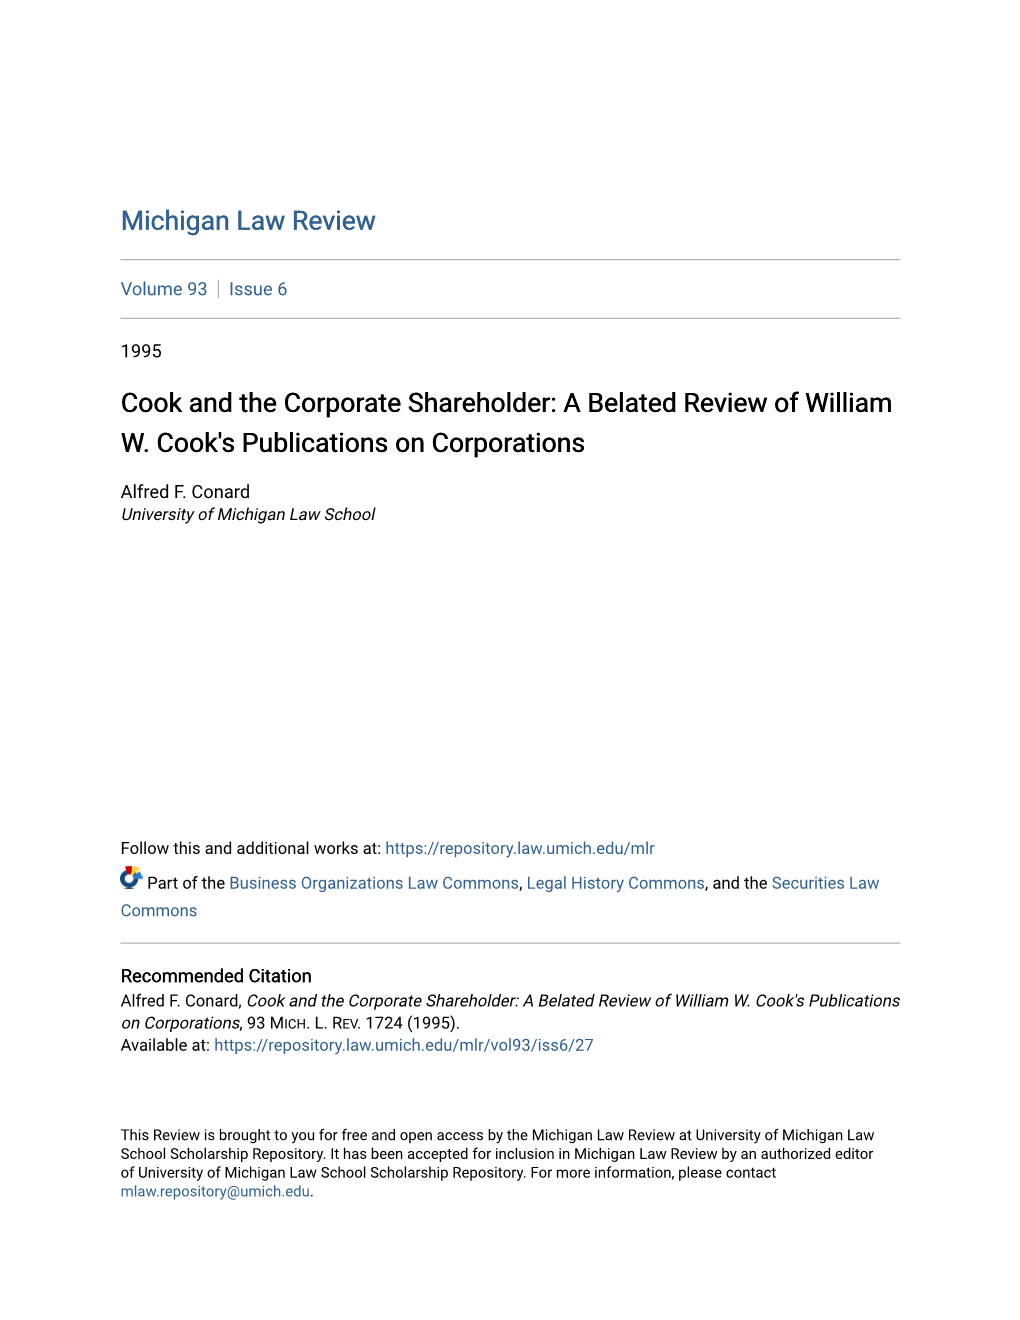 A Belated Review of William W. Cook's Publications on Corporations